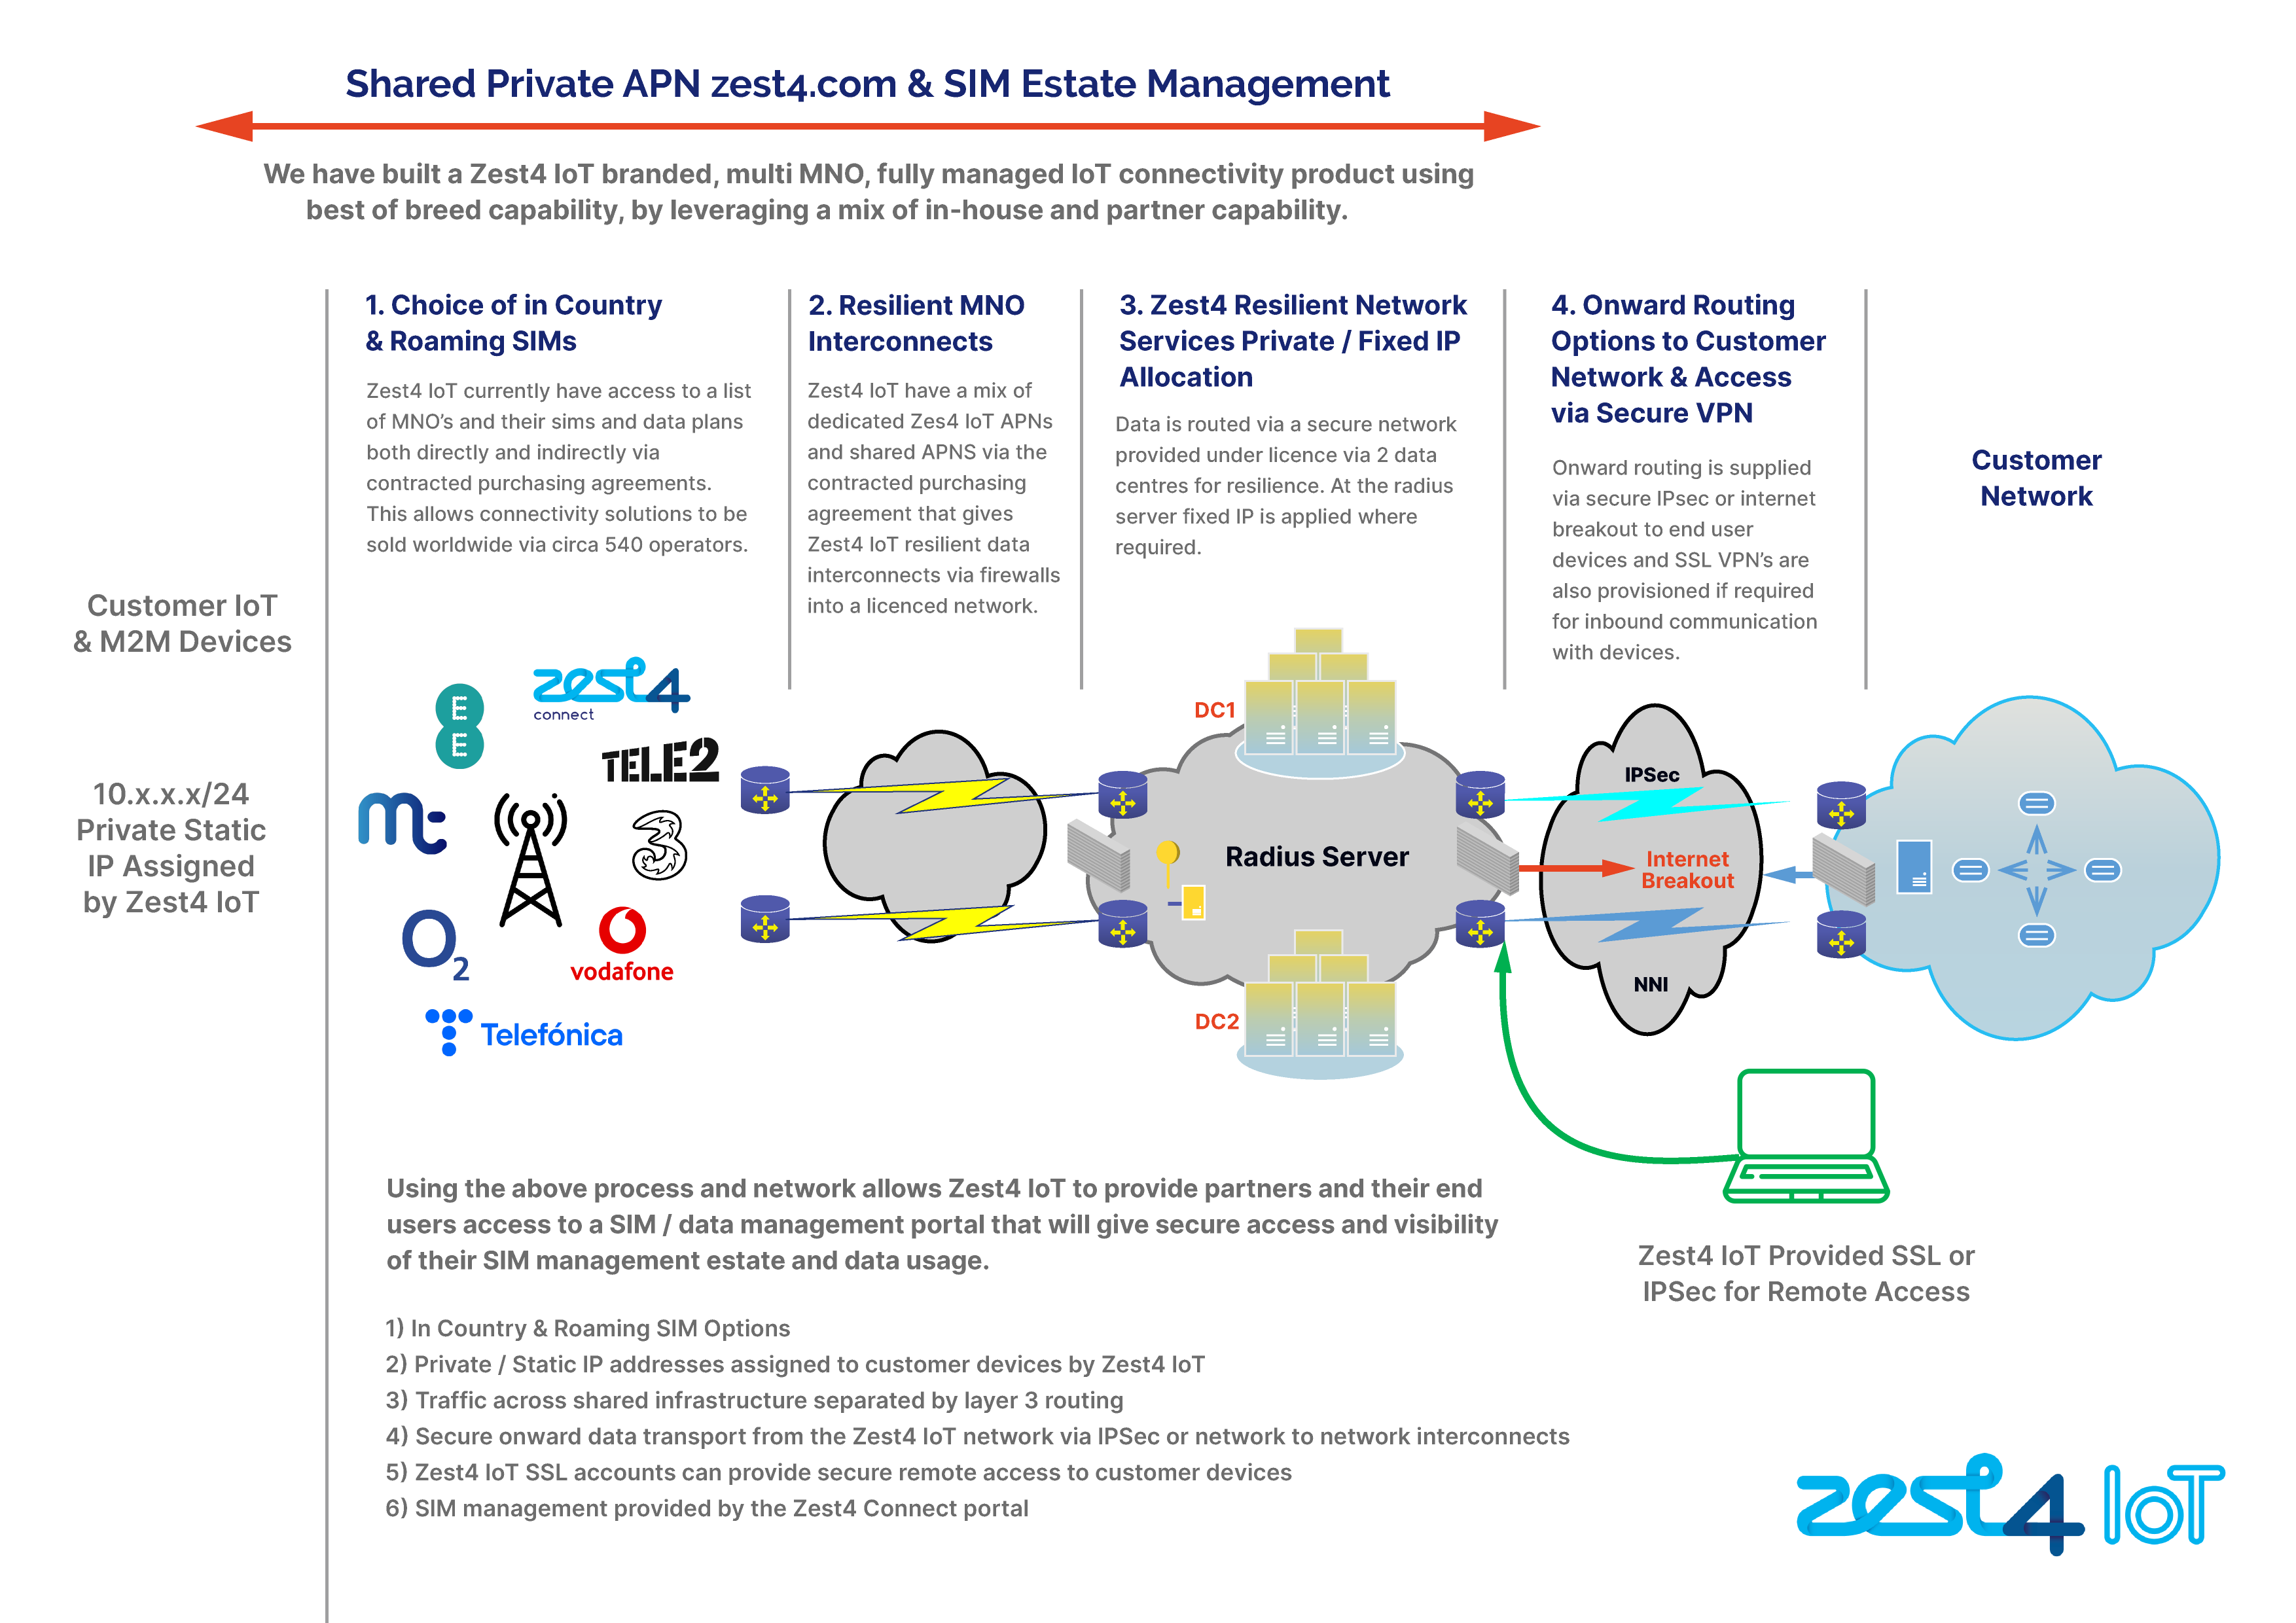 A graphic of a shared Private APN and how they work